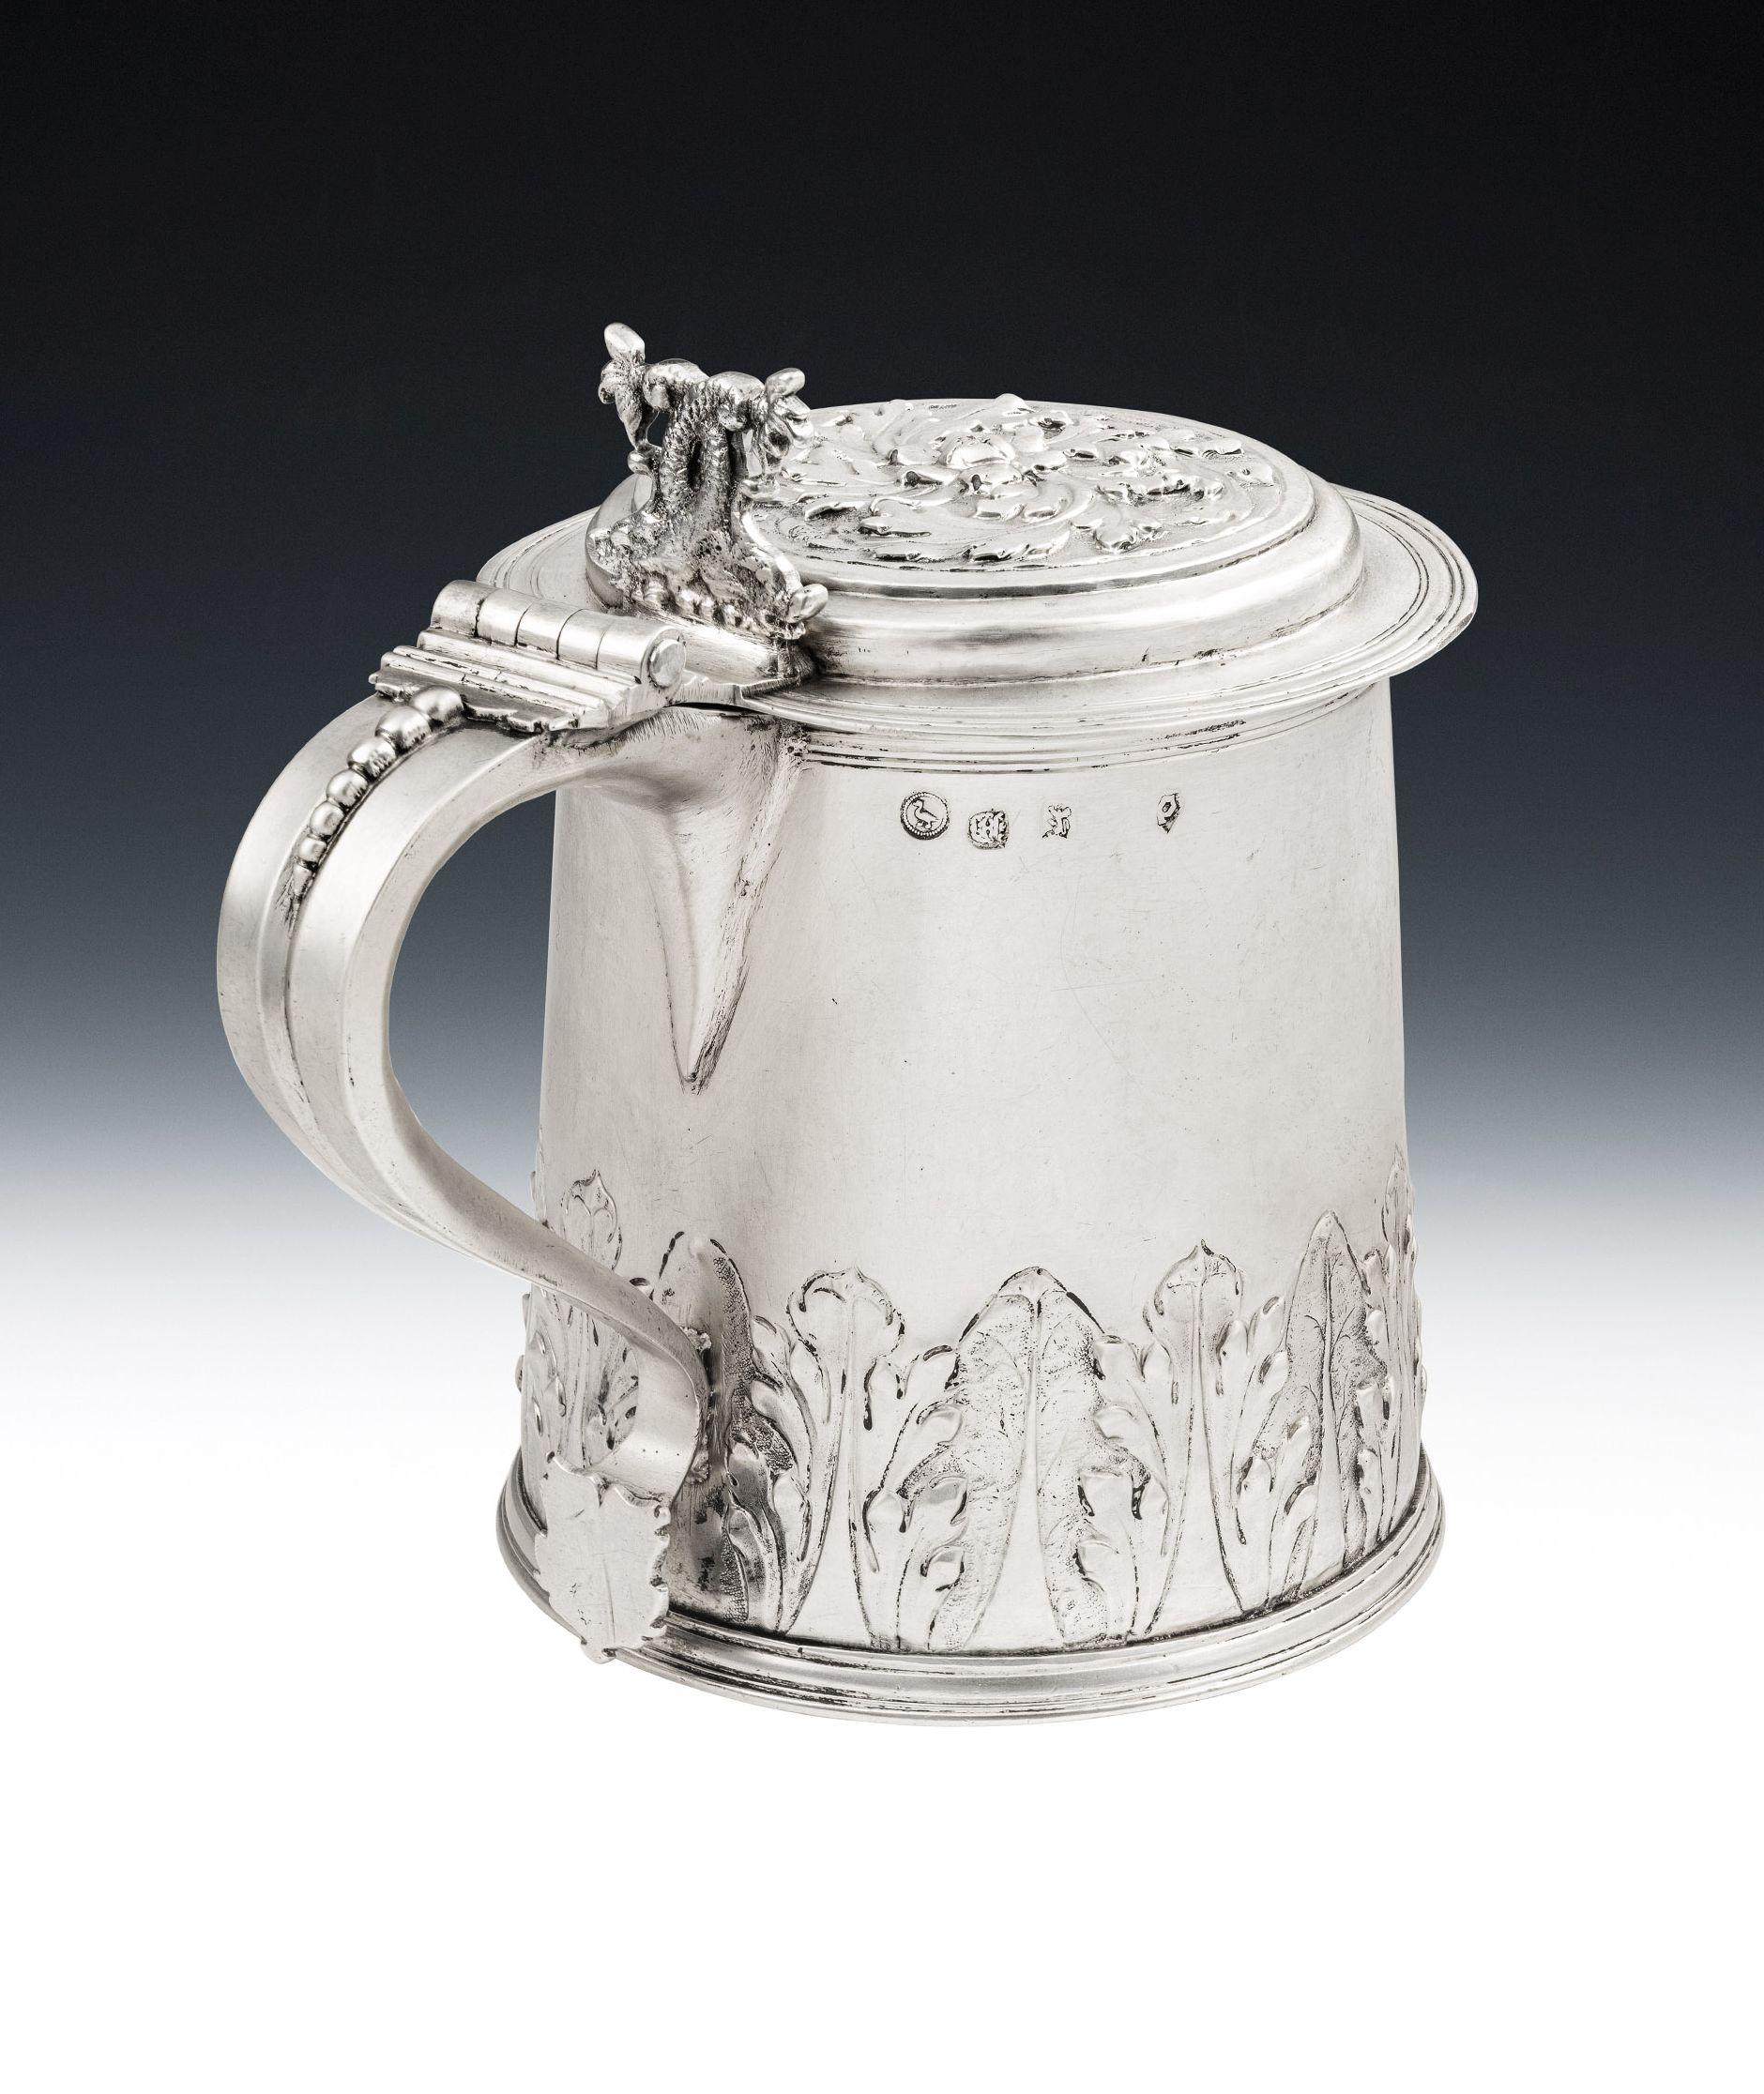 An Important Charles II Tankard and Cover Made in London in 1681 by John Duck

This extremely fine piece is of a large tapering cylindrical form with a reeded skirted base.  The sides are unusually embossed with a lower band of matted acanthus